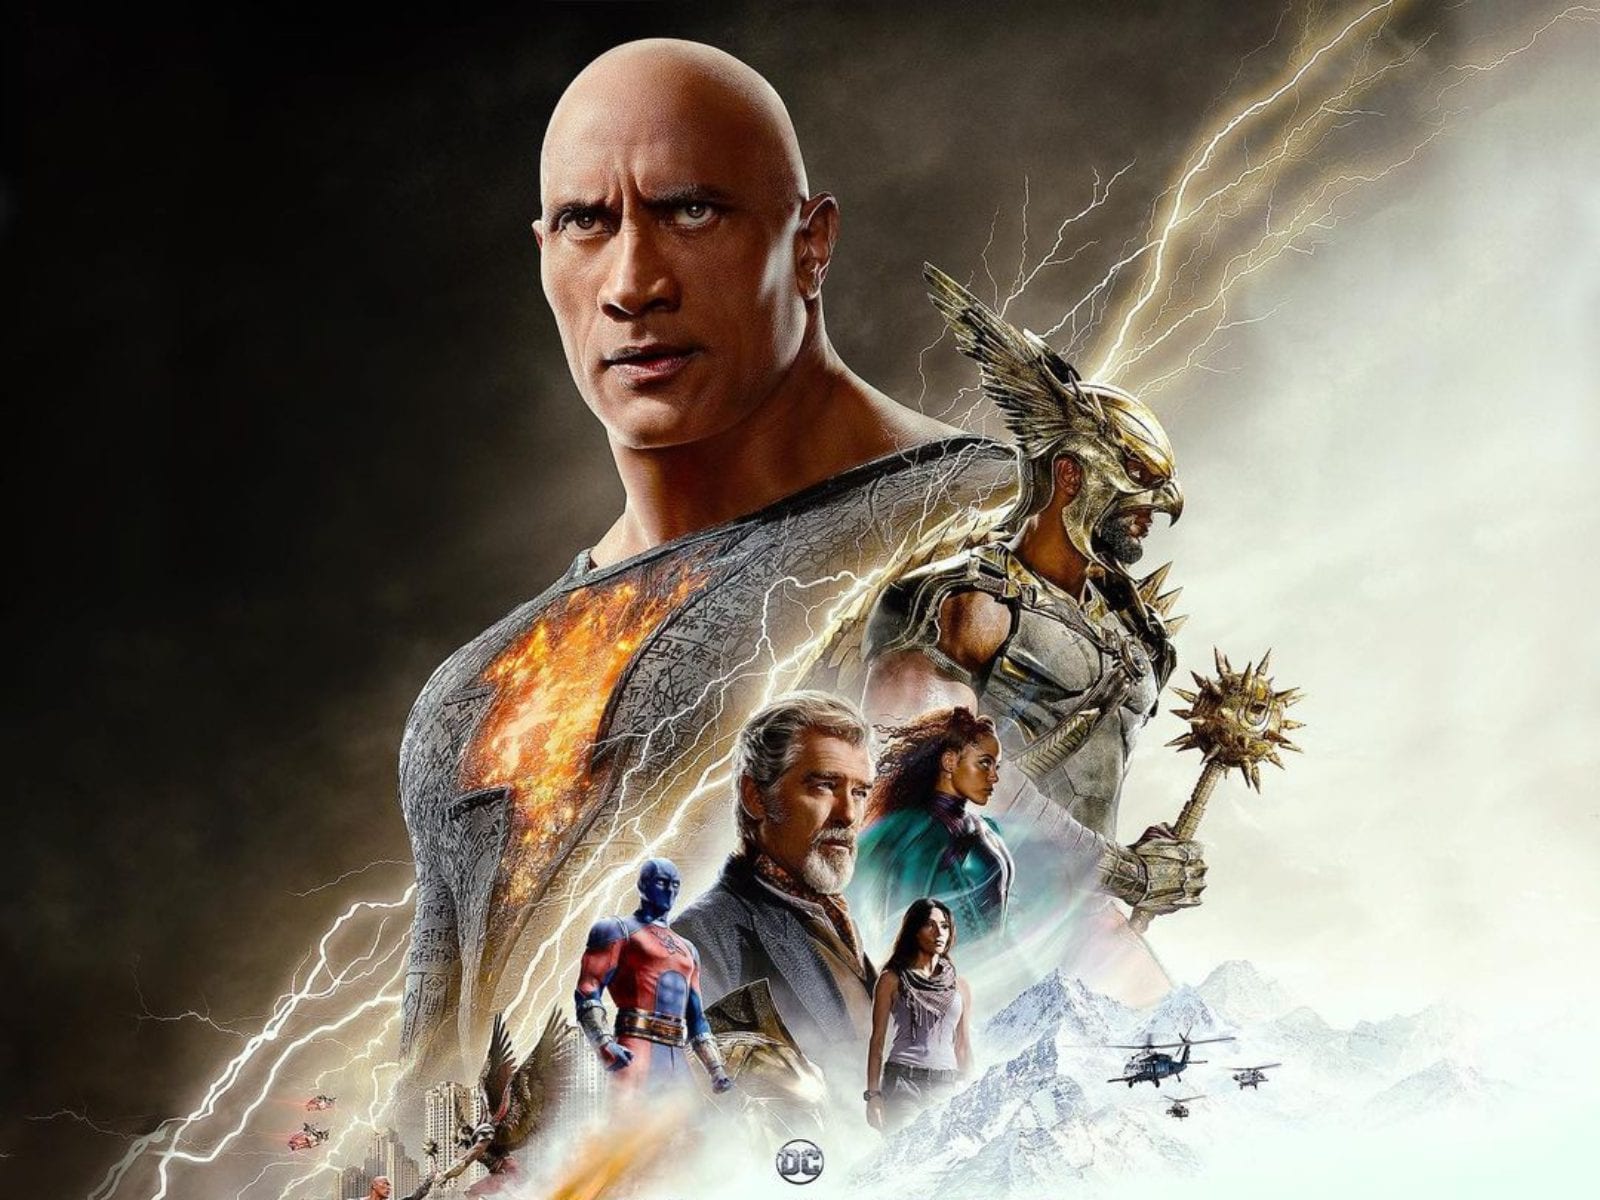 Black Adam Review Despite Its Flaws, Dwayne Johnson Film Makes for Good One-Time Watch